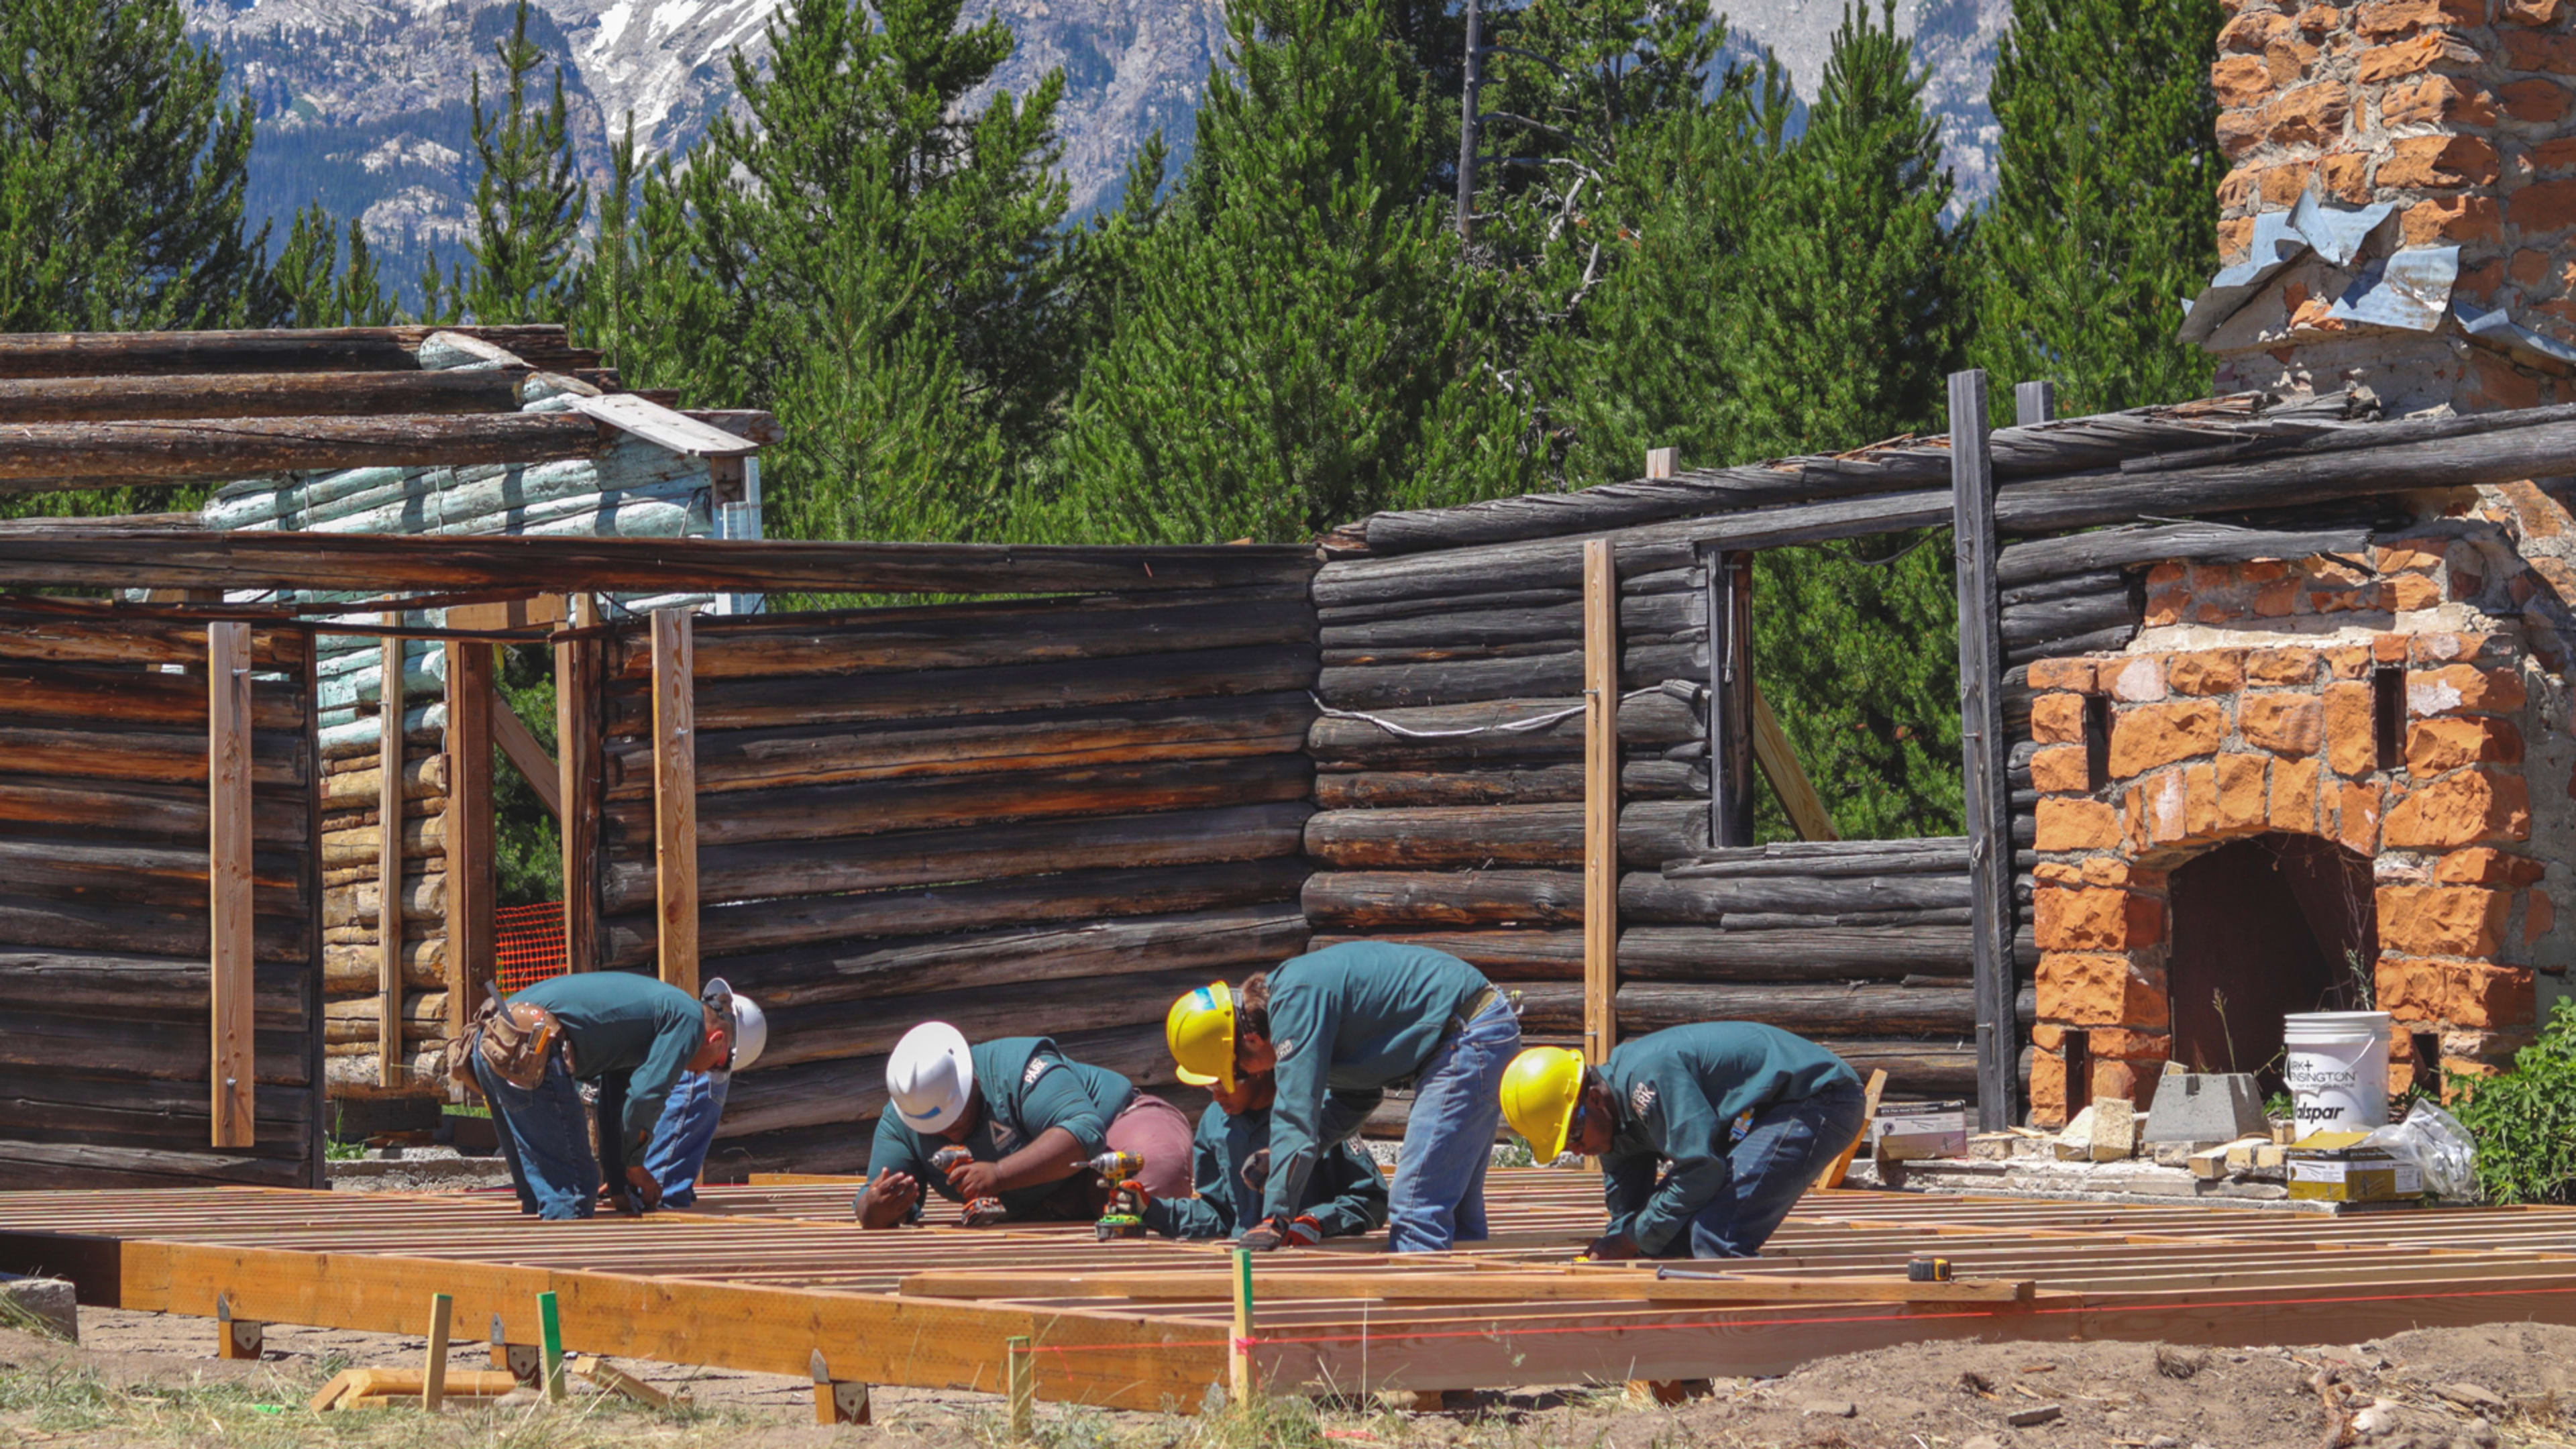 The national parks system is falling apart: These diverse service corps can help fix it